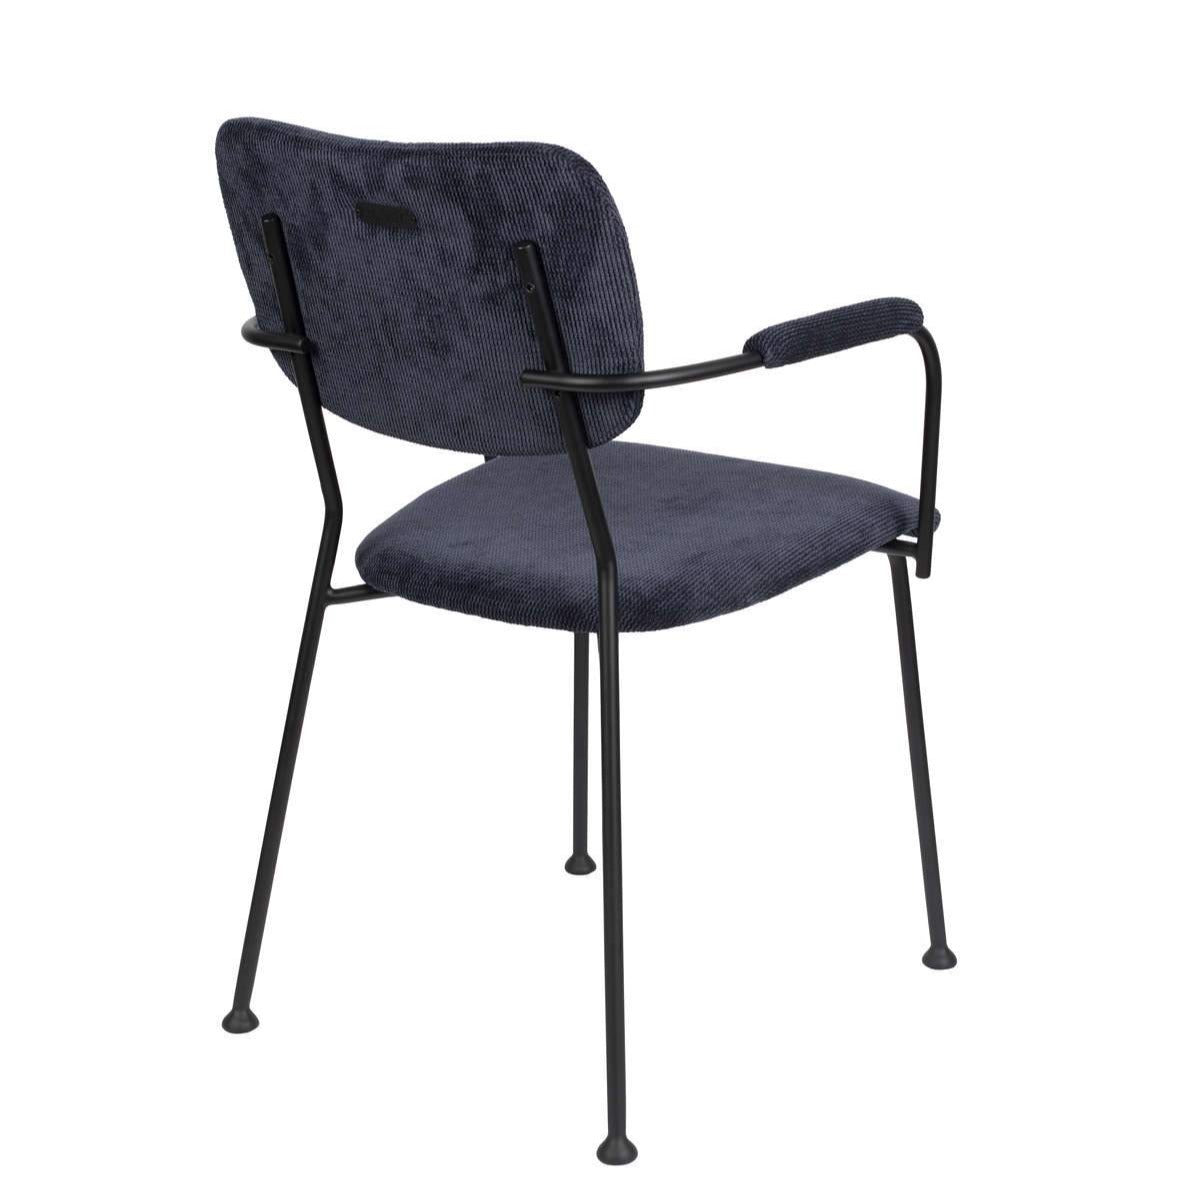 Chair with armrests BENSON navy blue, Zuiver, Eye on Design